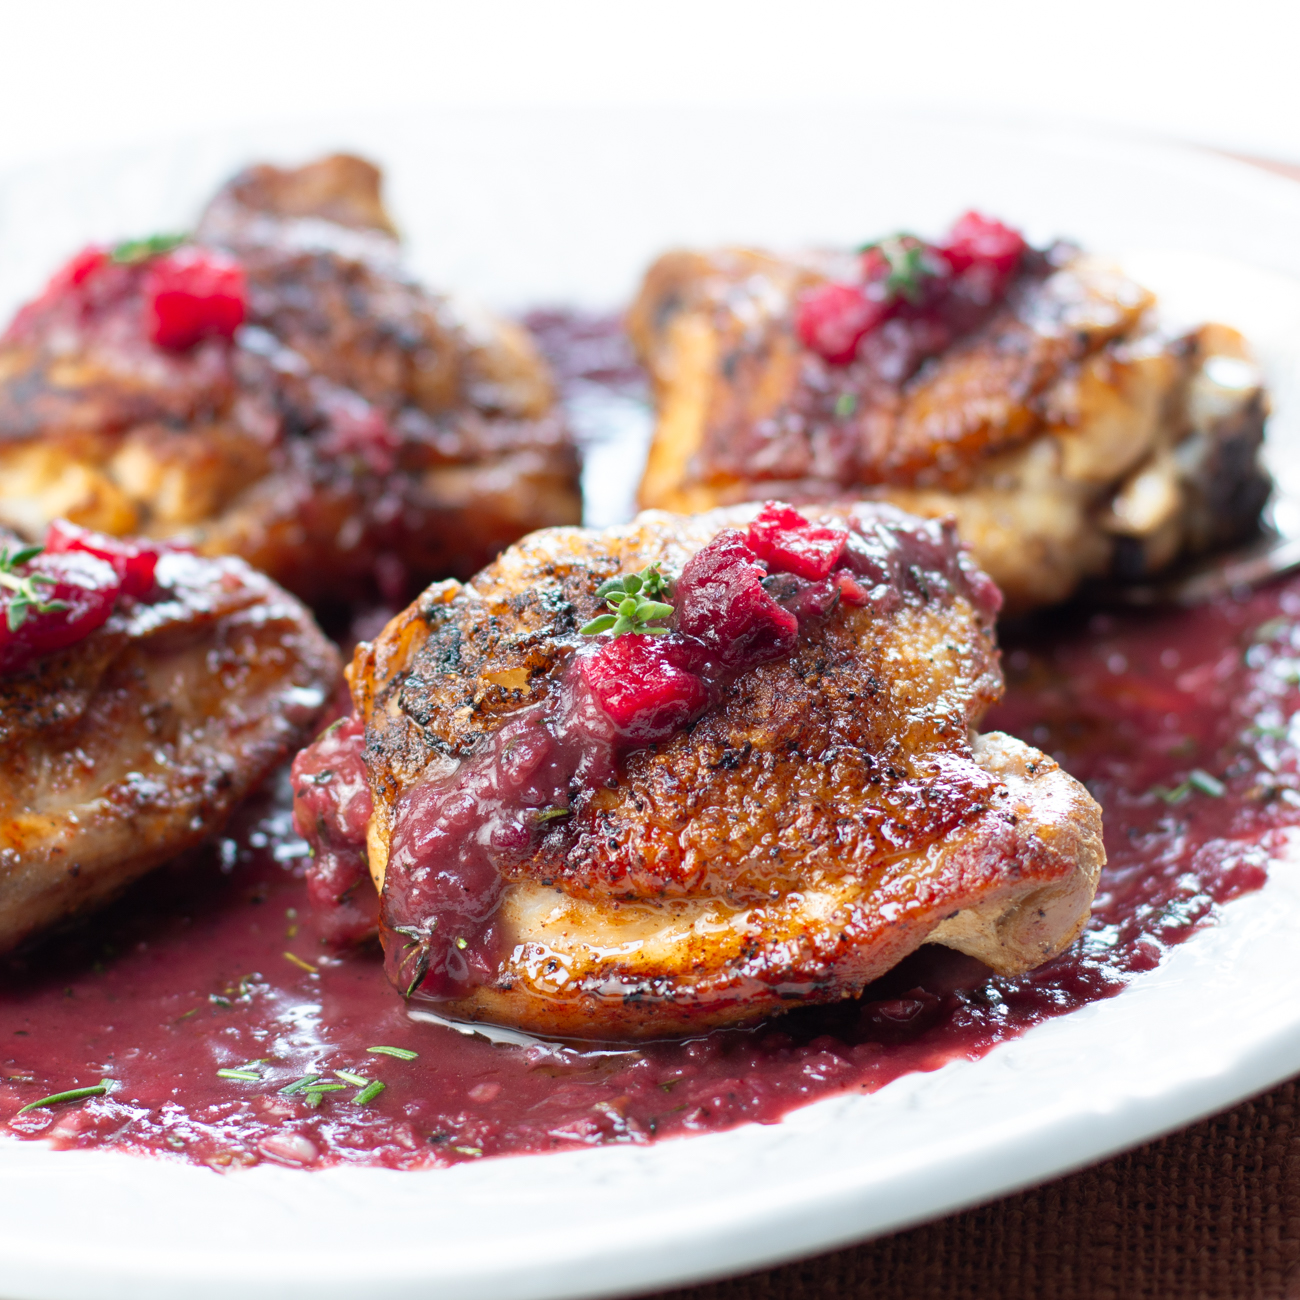 Crispy Chicken Thighs with Savory Cranberry Sauce (using your leftover cranberry sauce!)